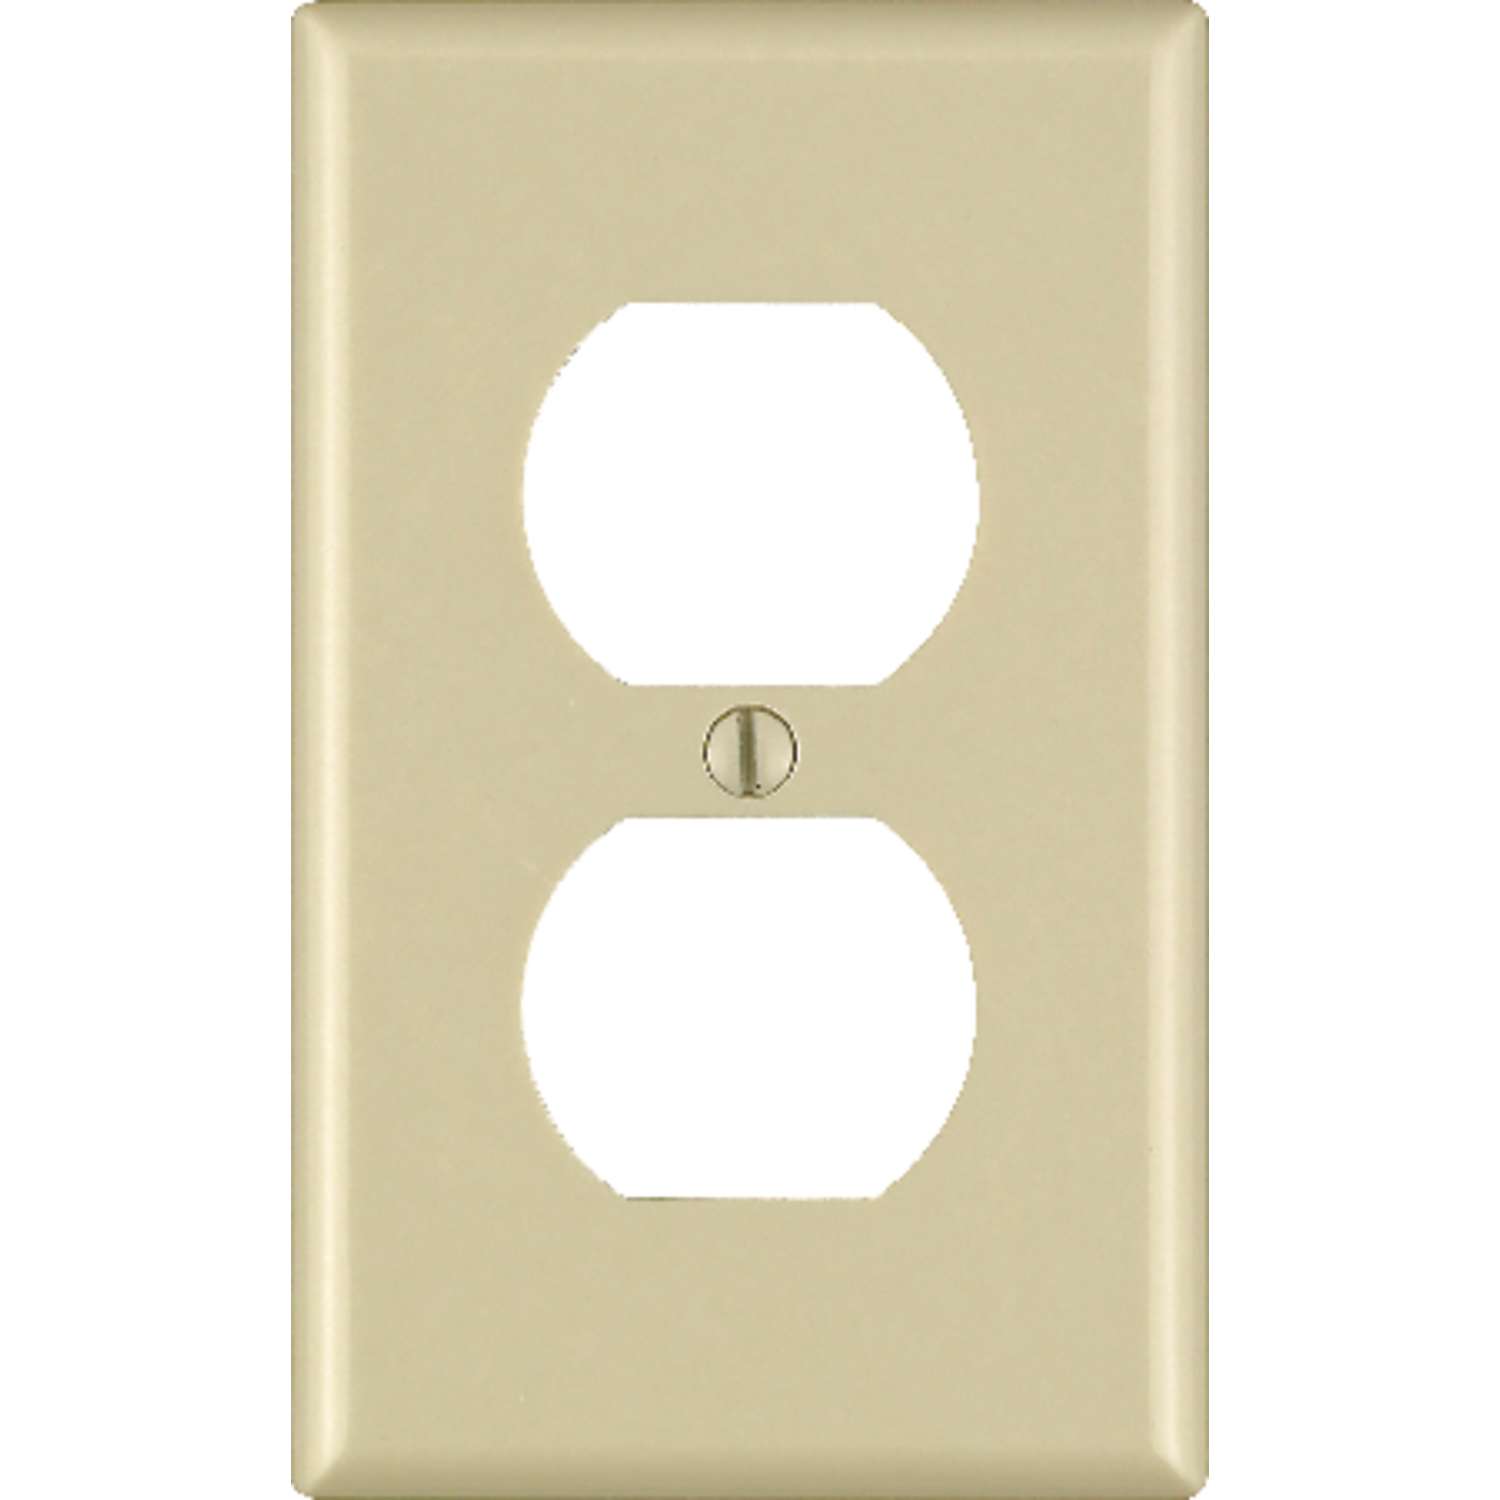 Leviton Ivory 1-gang Outlet Cover Duplex Receptacle Plastic Wallplate 86003 for sale online 